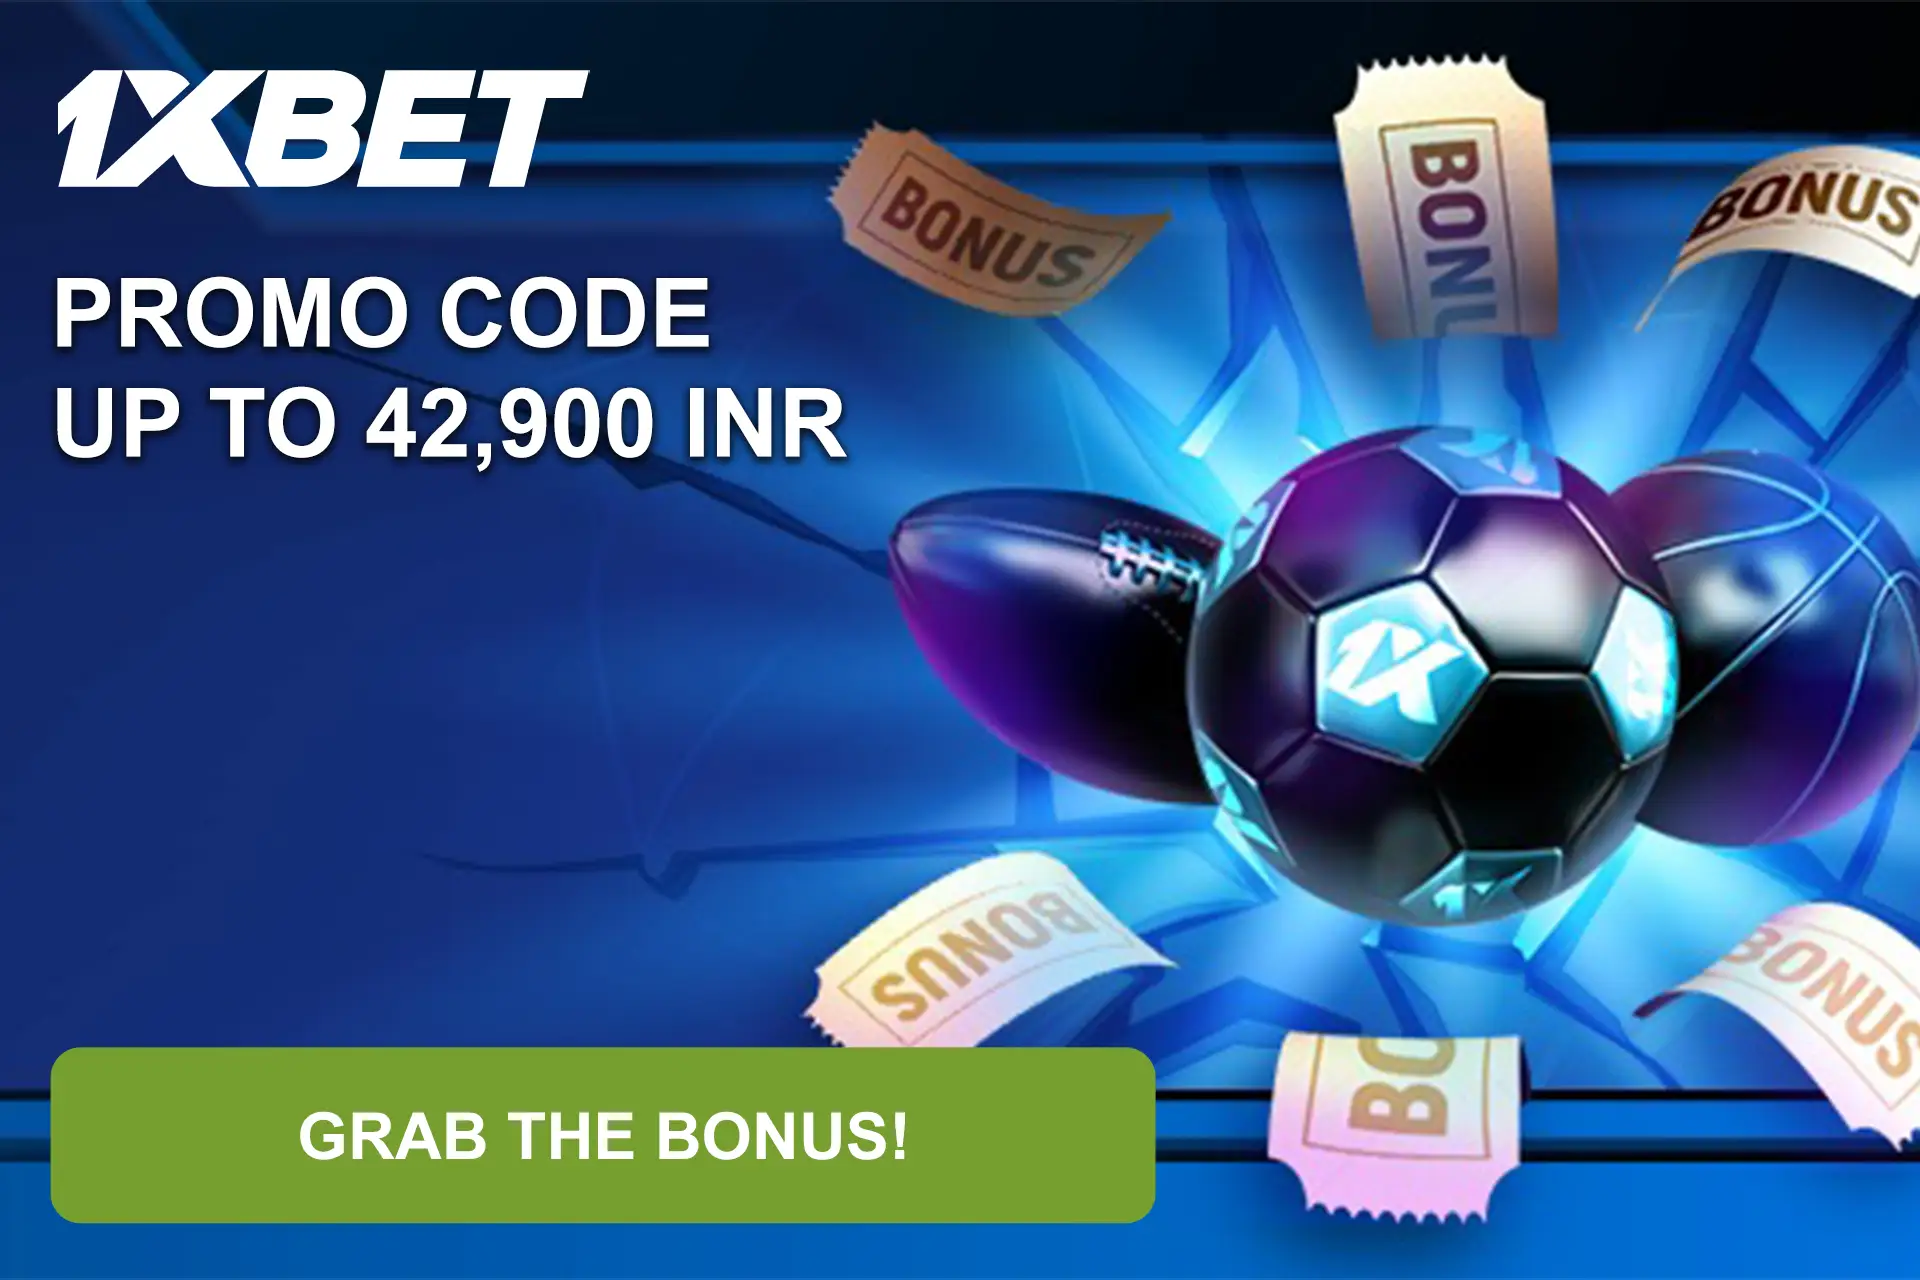 1xBet offers a sports bonus with our promo code up to 42,900 rupees for new players from India.